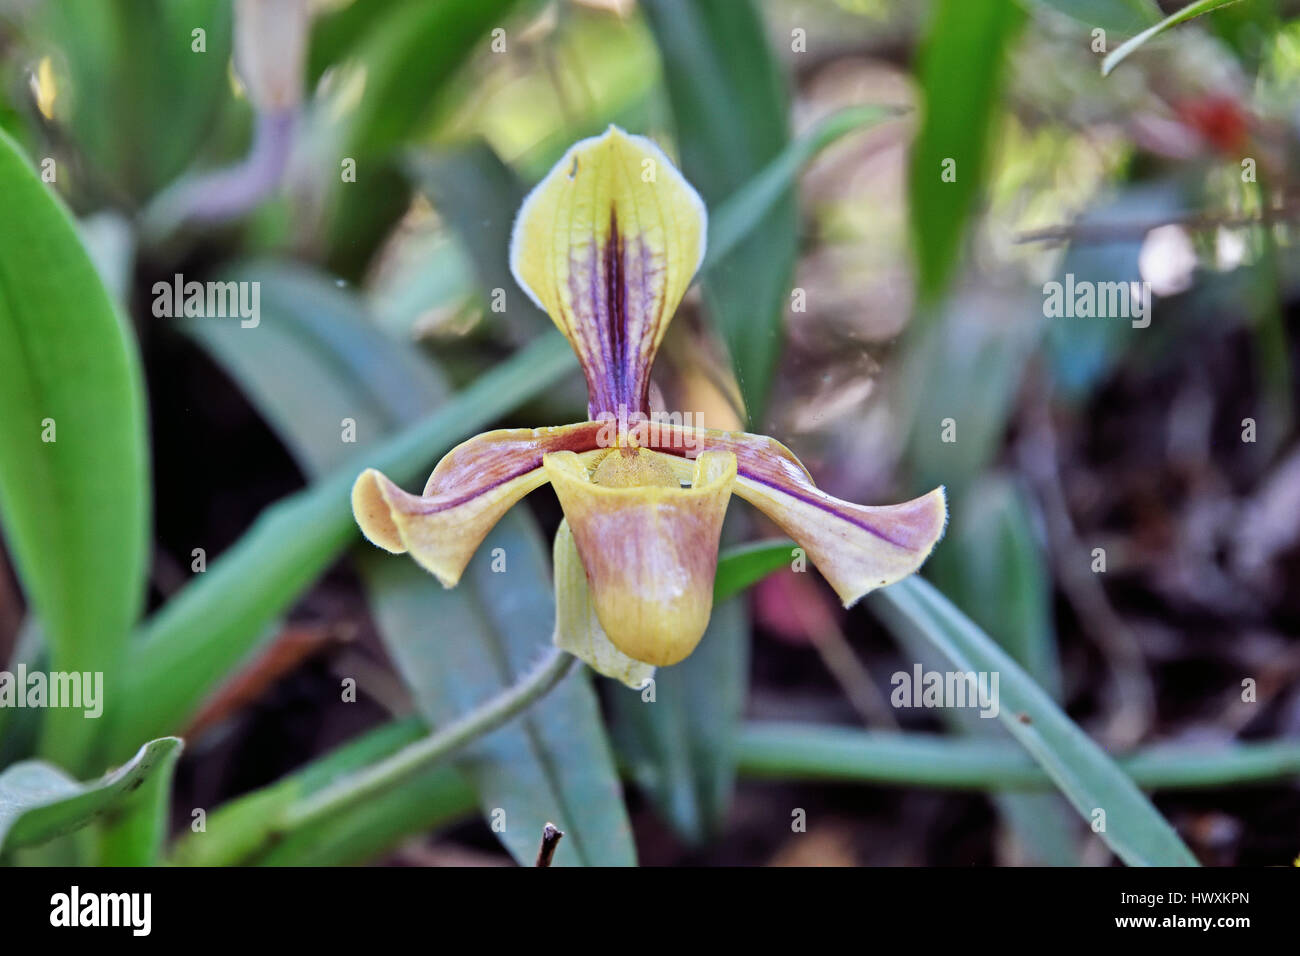 A Slipper Orchid (Paphiopedilum villosum) growing on a tree trunk in the forest in North East Thailand Stock Photo